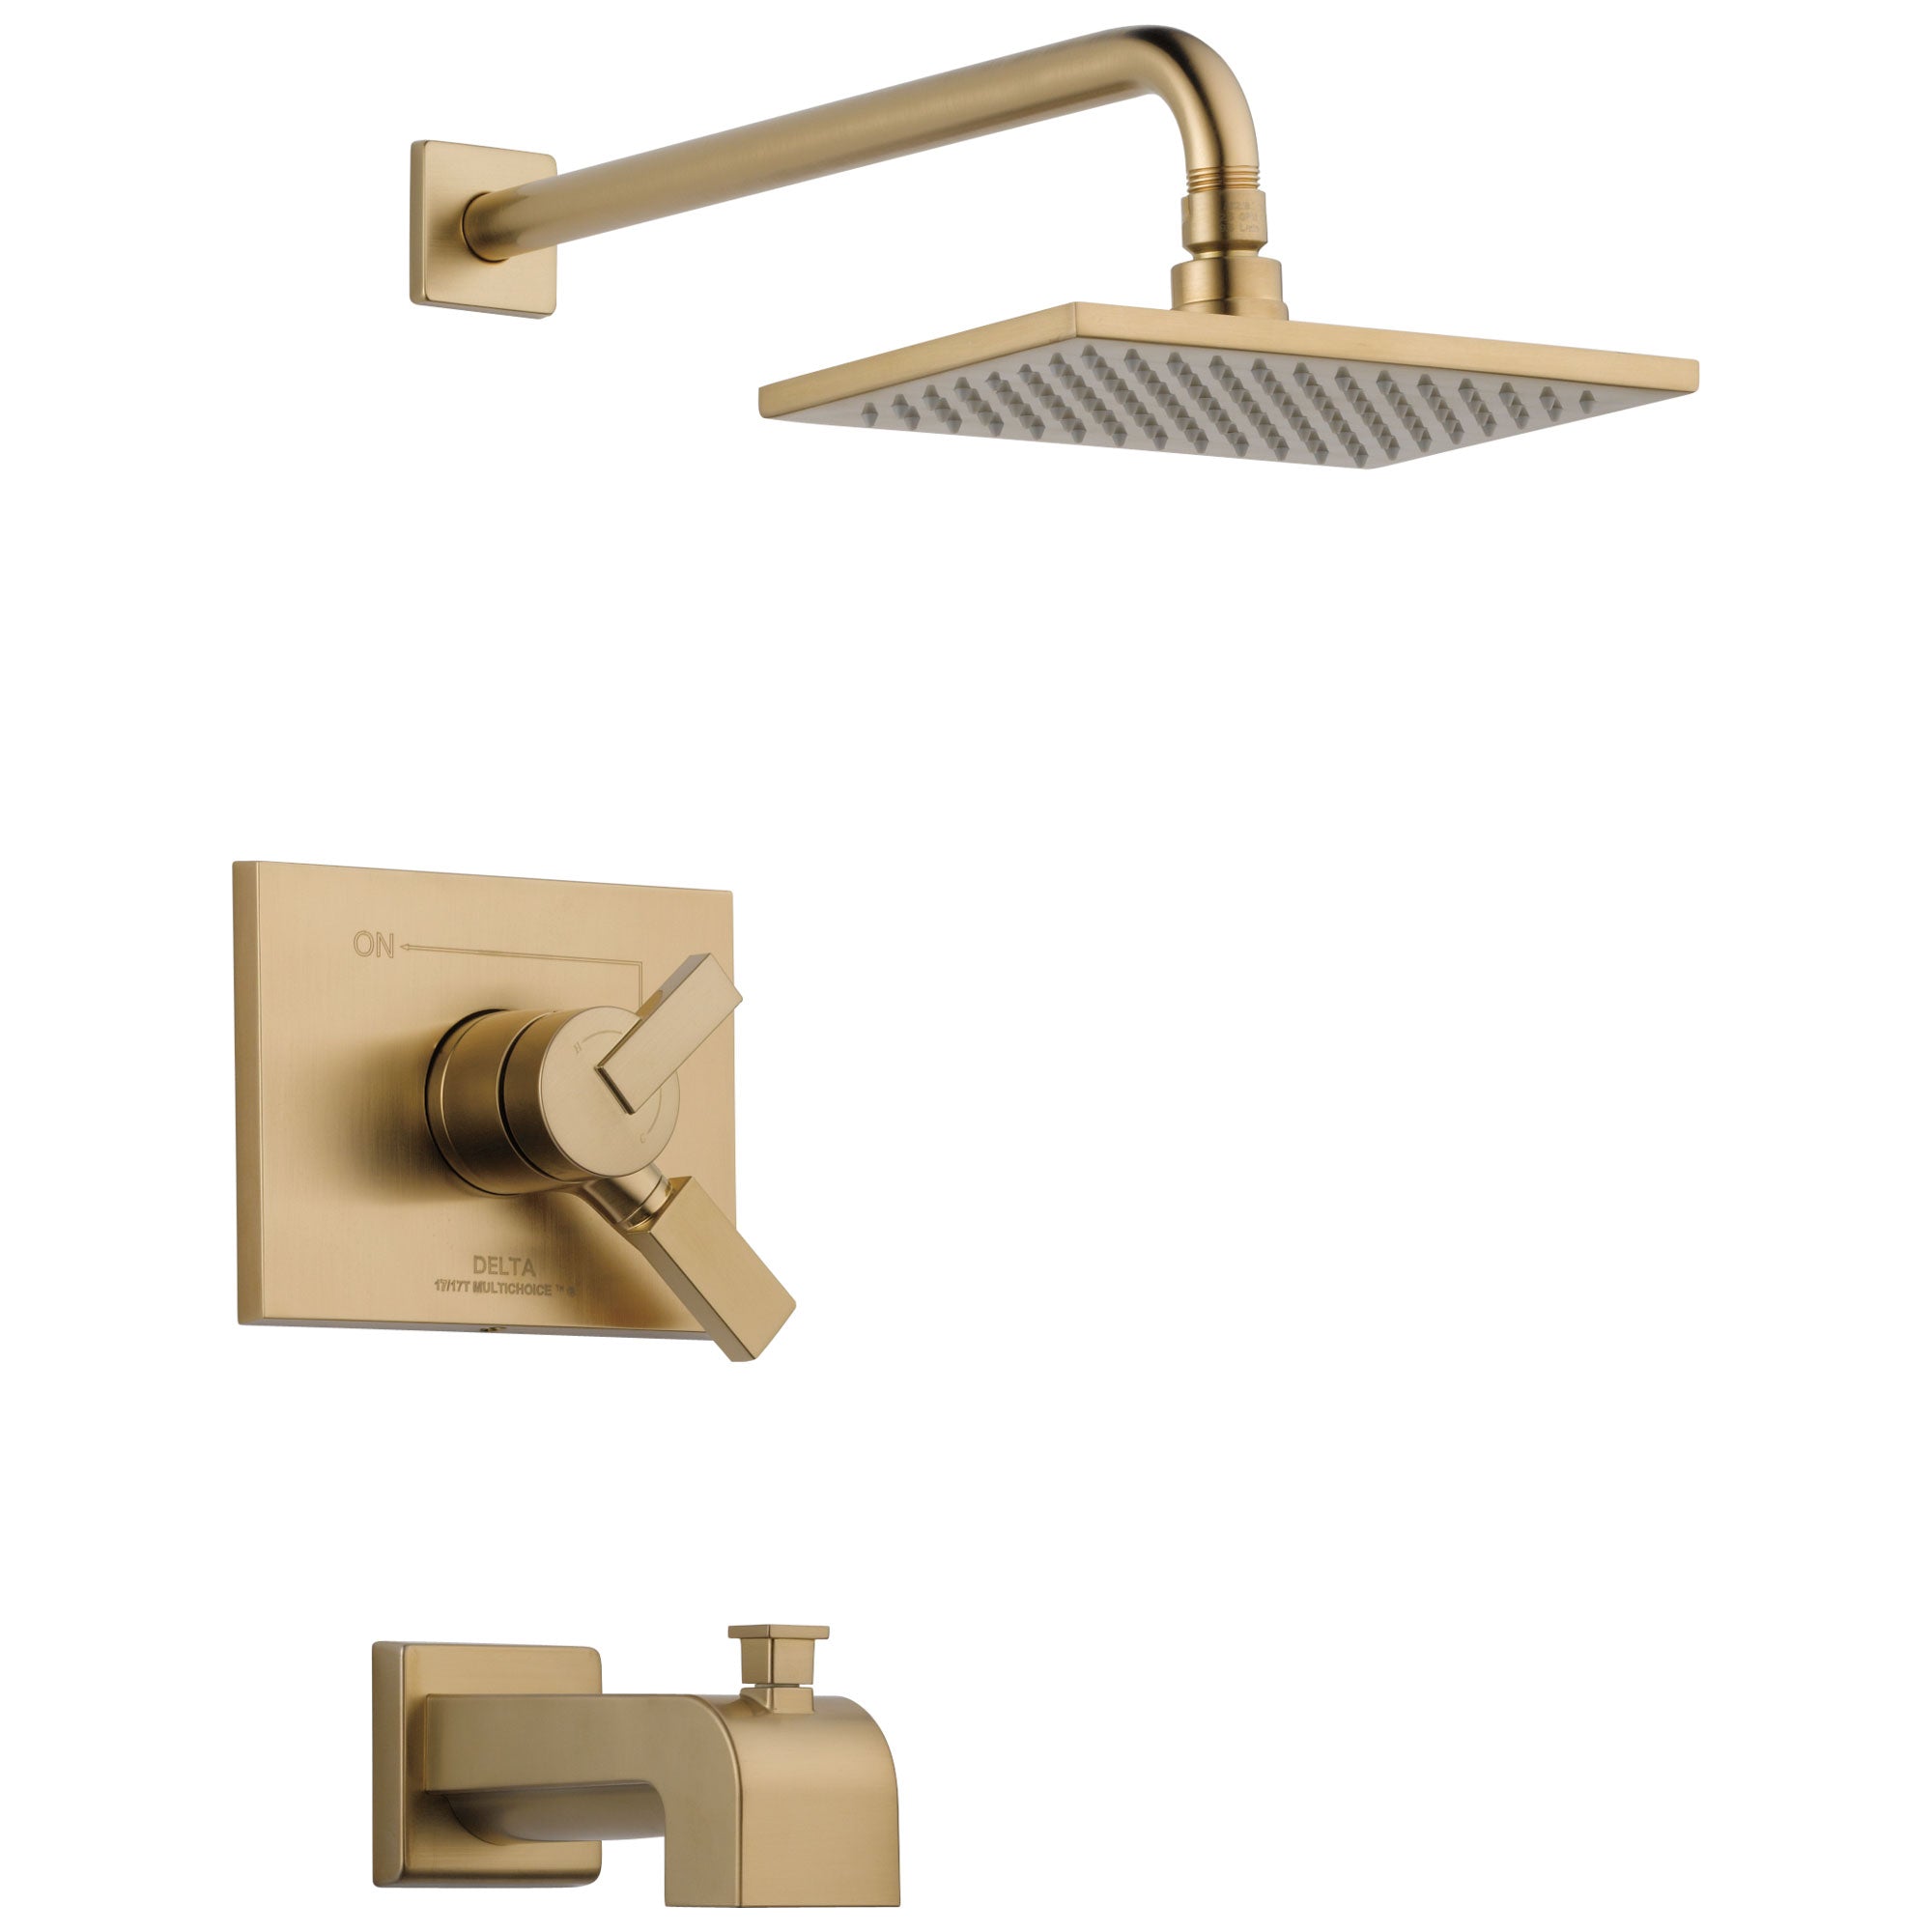 Delta Vero Champagne Bronze Finish Water Efficient Tub & Shower Combo Faucet Includes 17 Series Cartridge, Handles, and Valve without Stops D3347V